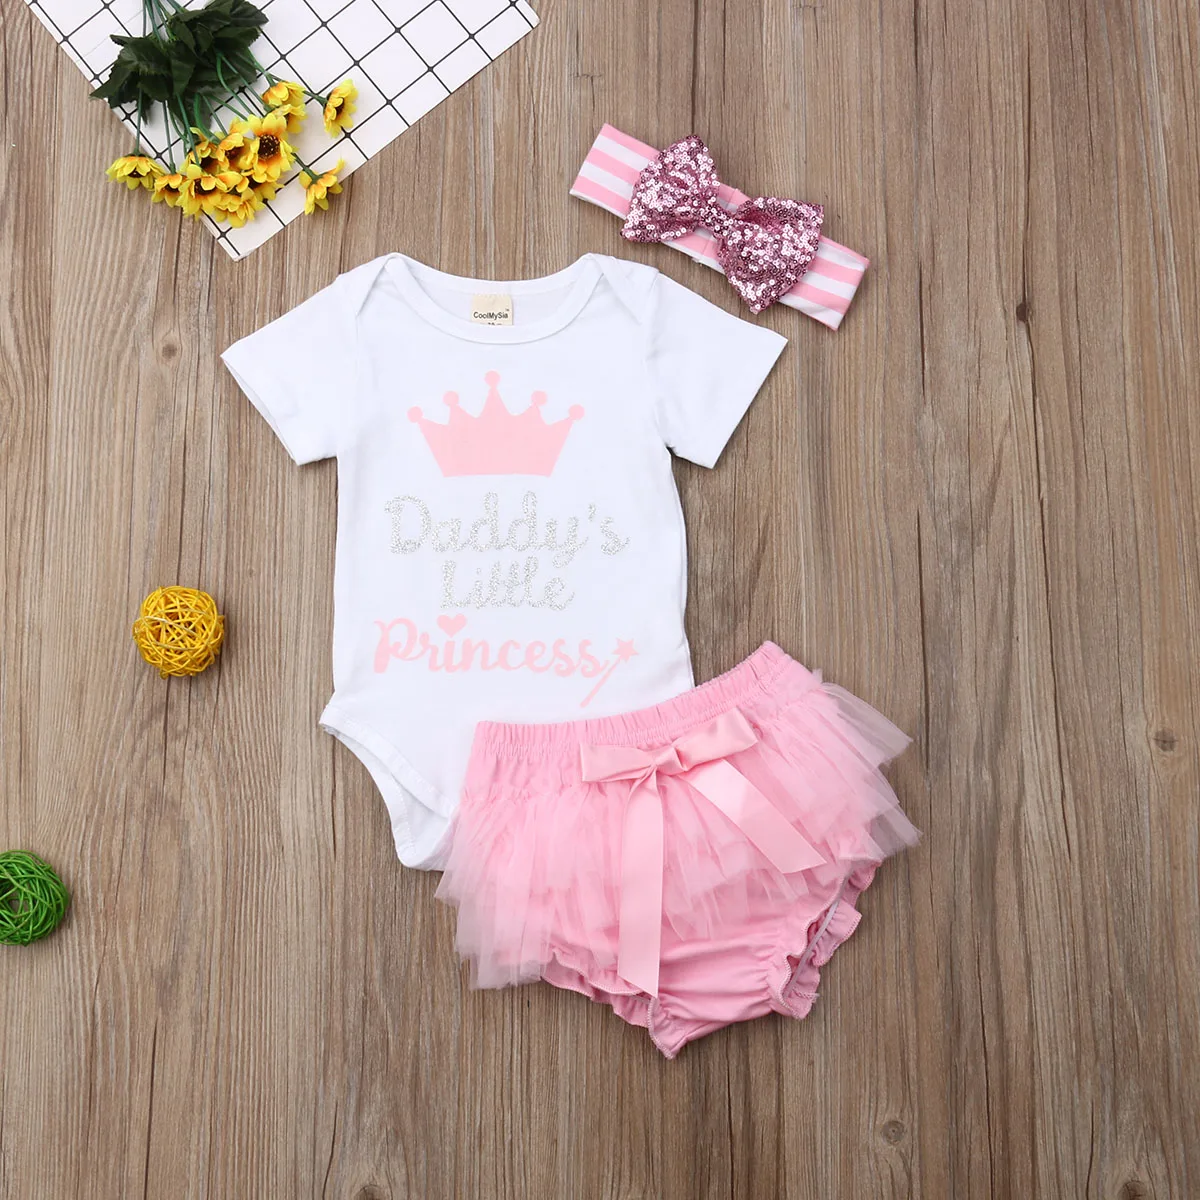 

Pudcoco Newborn Baby Girl Clothes An Crown Print Romper Tops Tulle Ruffle Shorts Bowknot Headband 3Pcs Outfits Clothes Summer